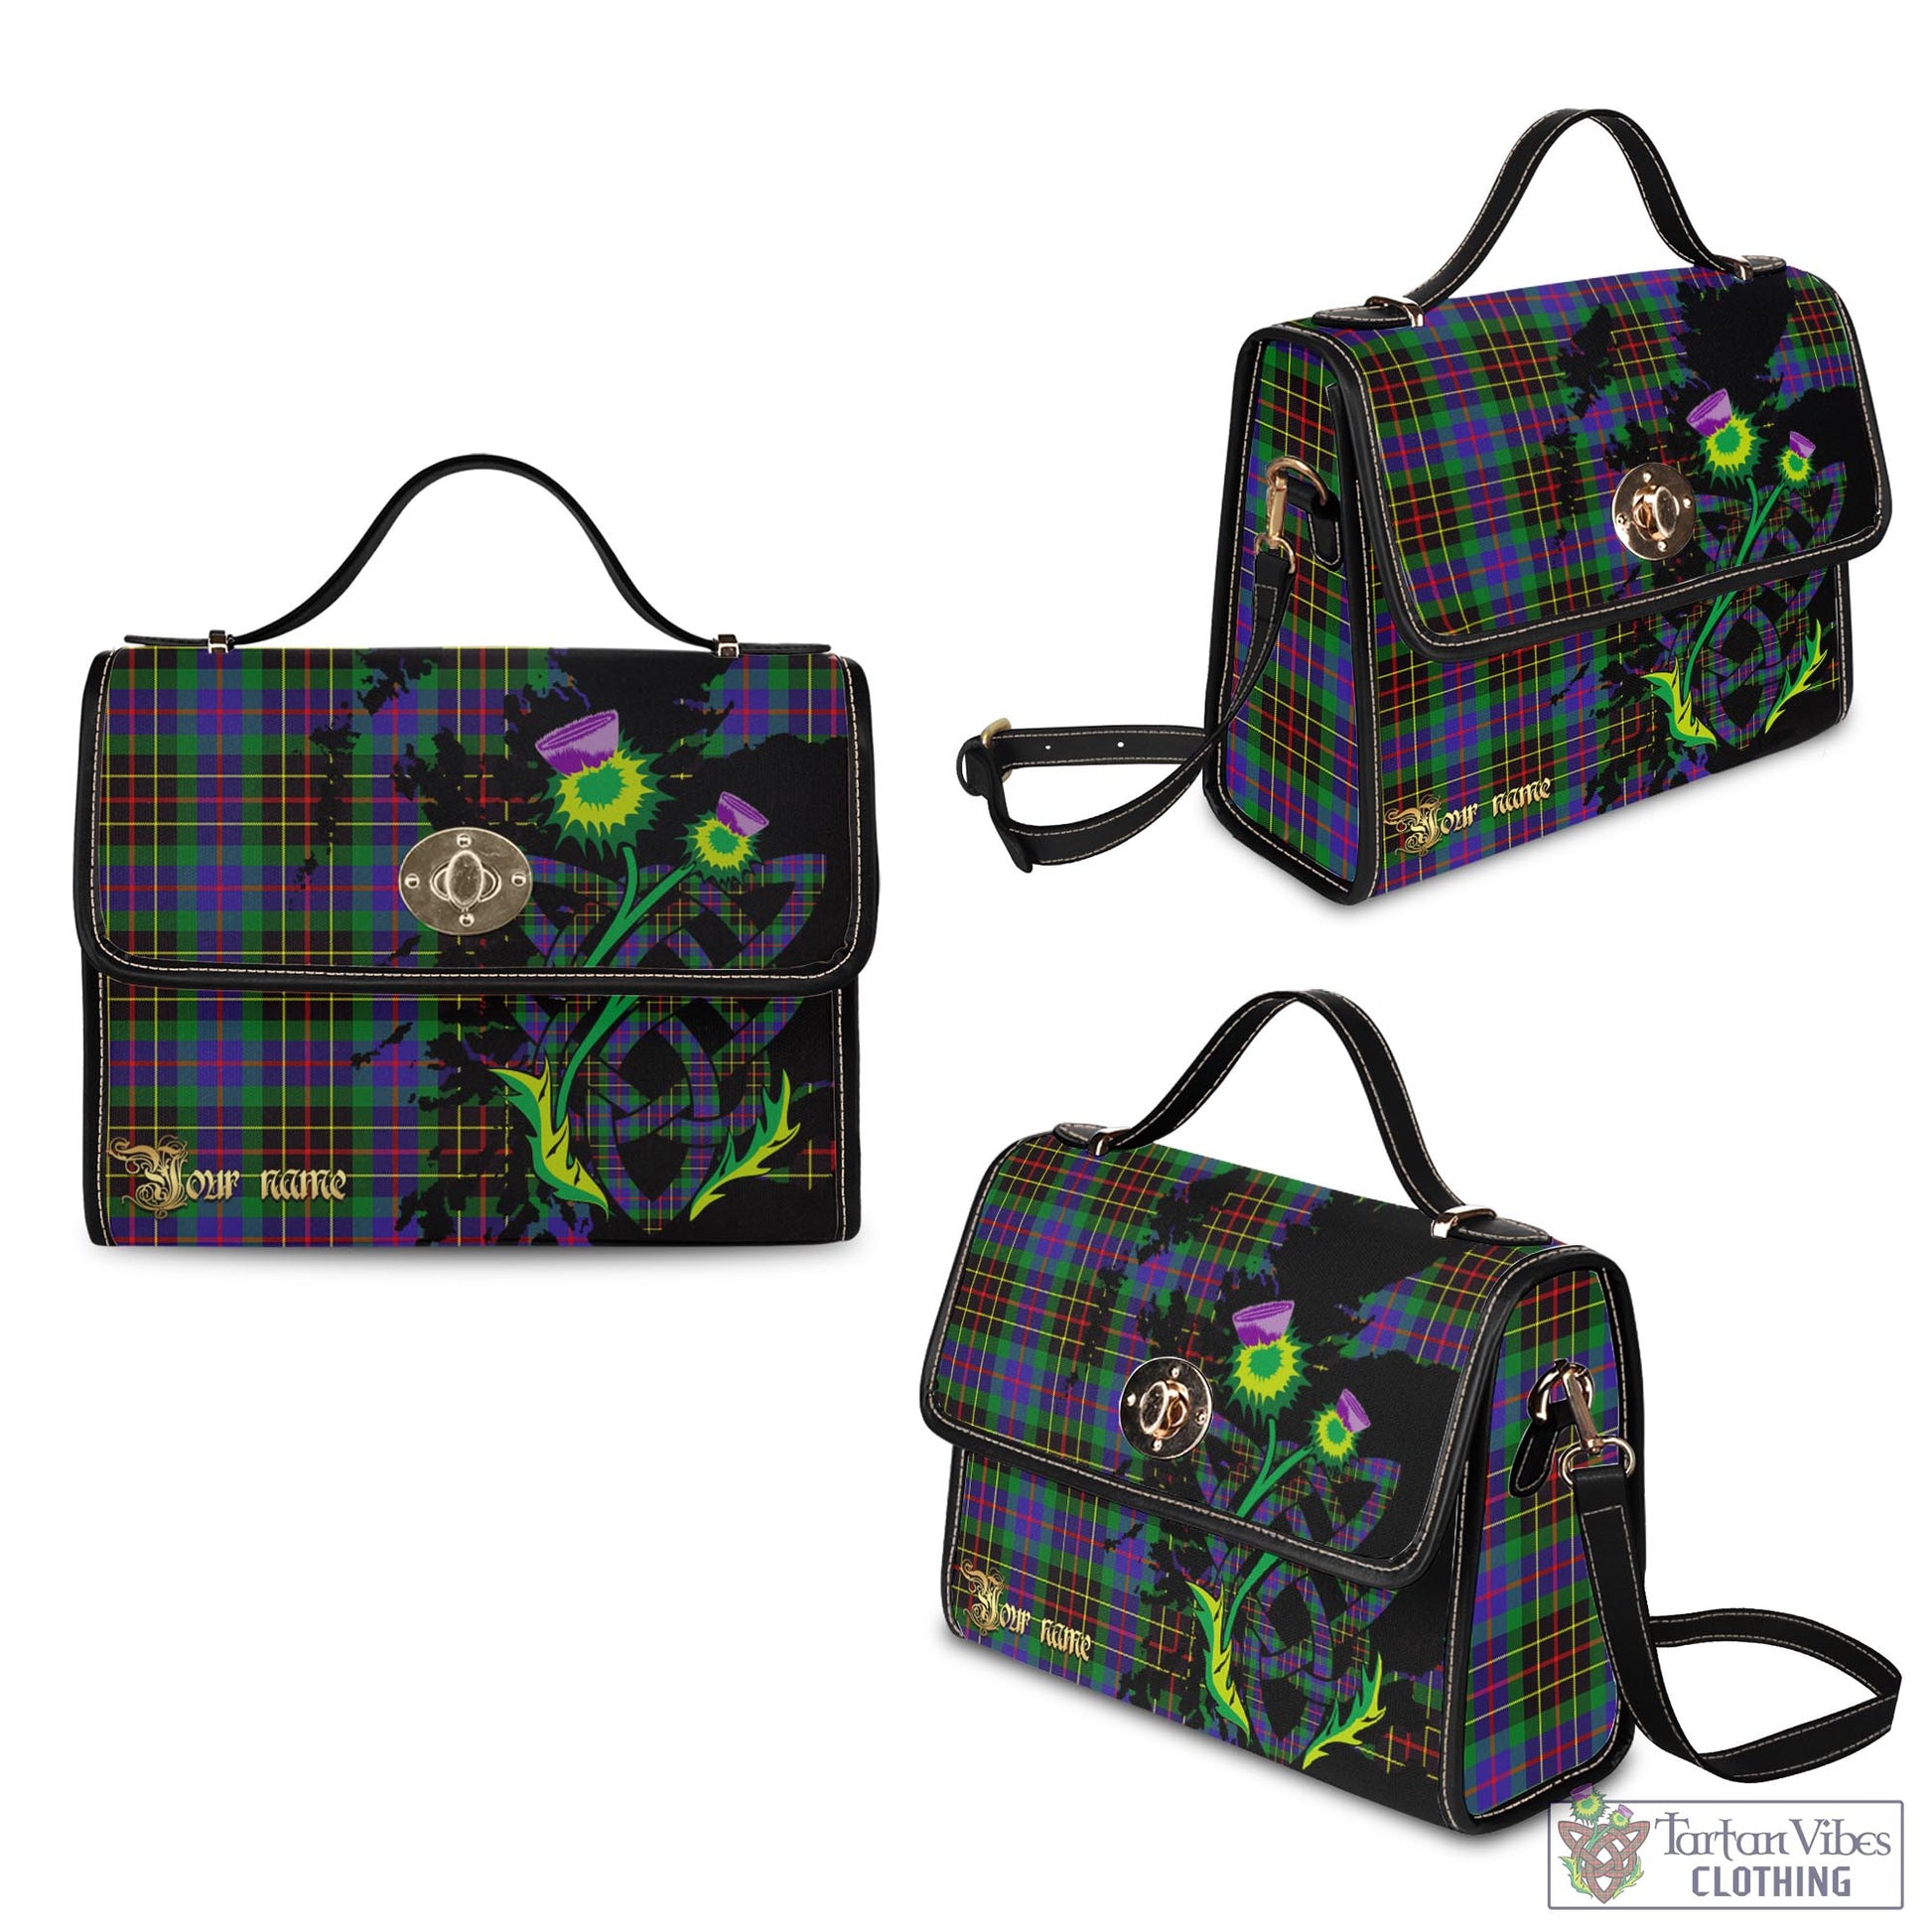 Tartan Vibes Clothing Brodie Hunting Modern Tartan Waterproof Canvas Bag with Scotland Map and Thistle Celtic Accents